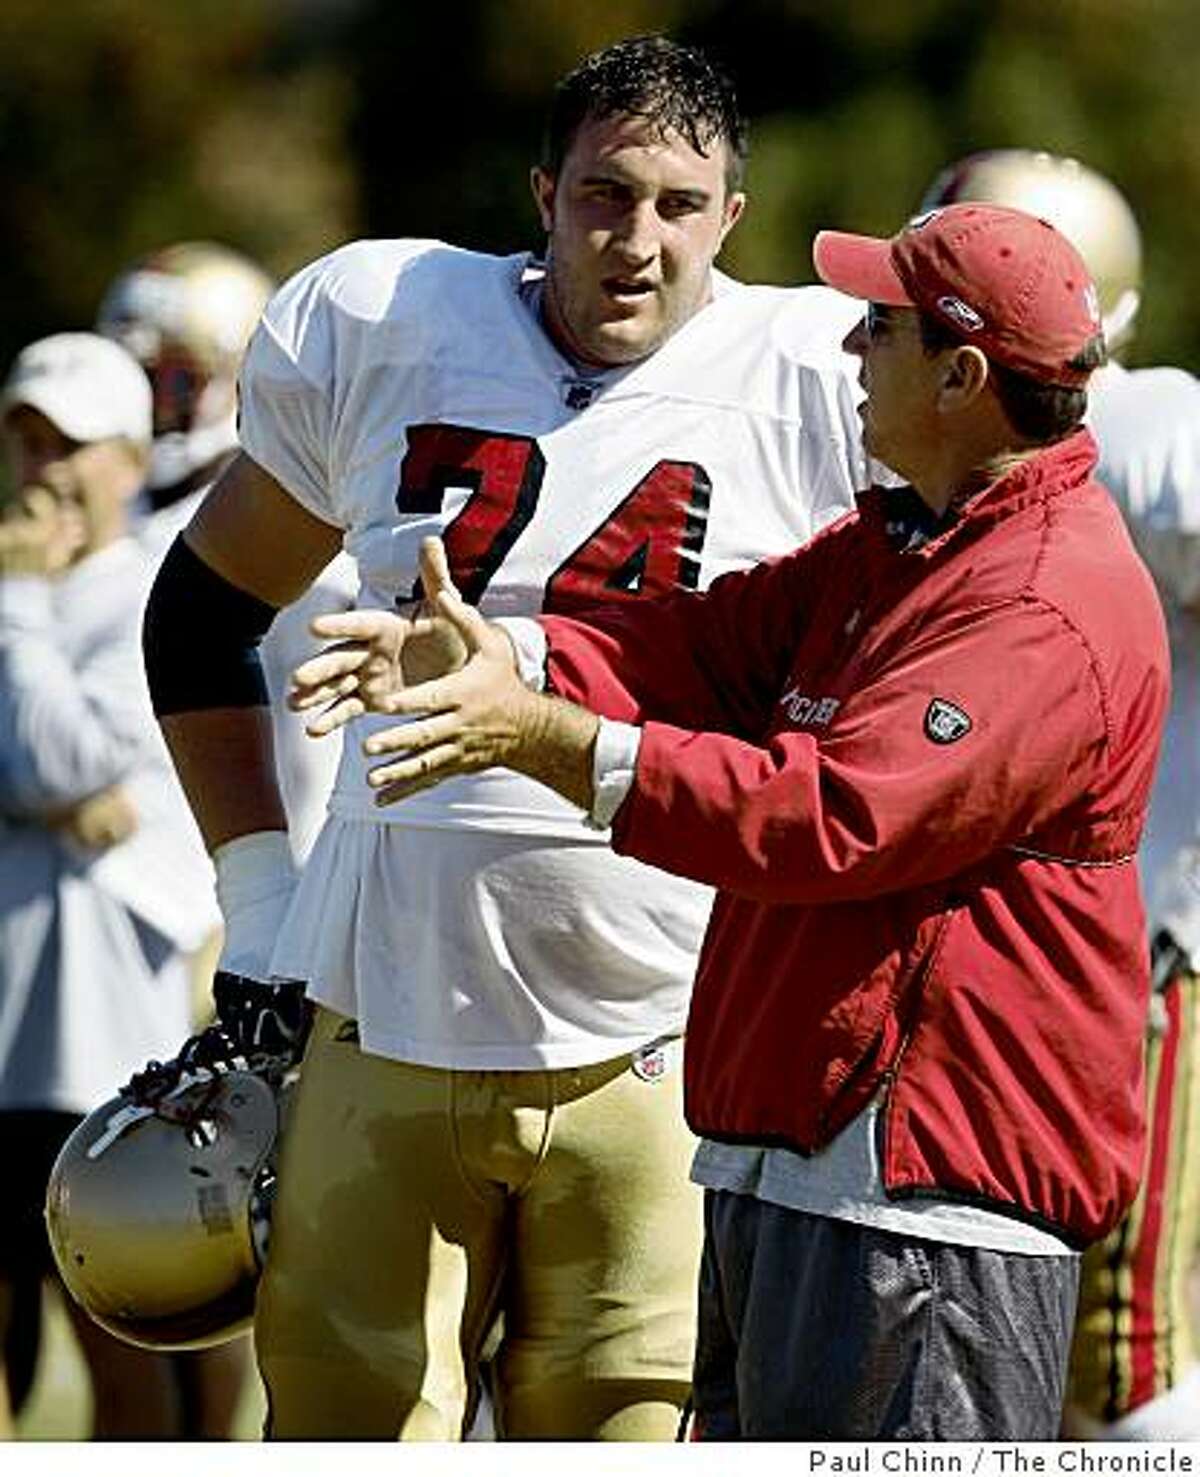 Tackle Joe Staley works with offensive line coach Chris Foerster during the San Francisco 49ers training camp in Santa Clara, Calif., on Thursday, July 31, 2008.Photo by Paul Chinn / The Chronicle